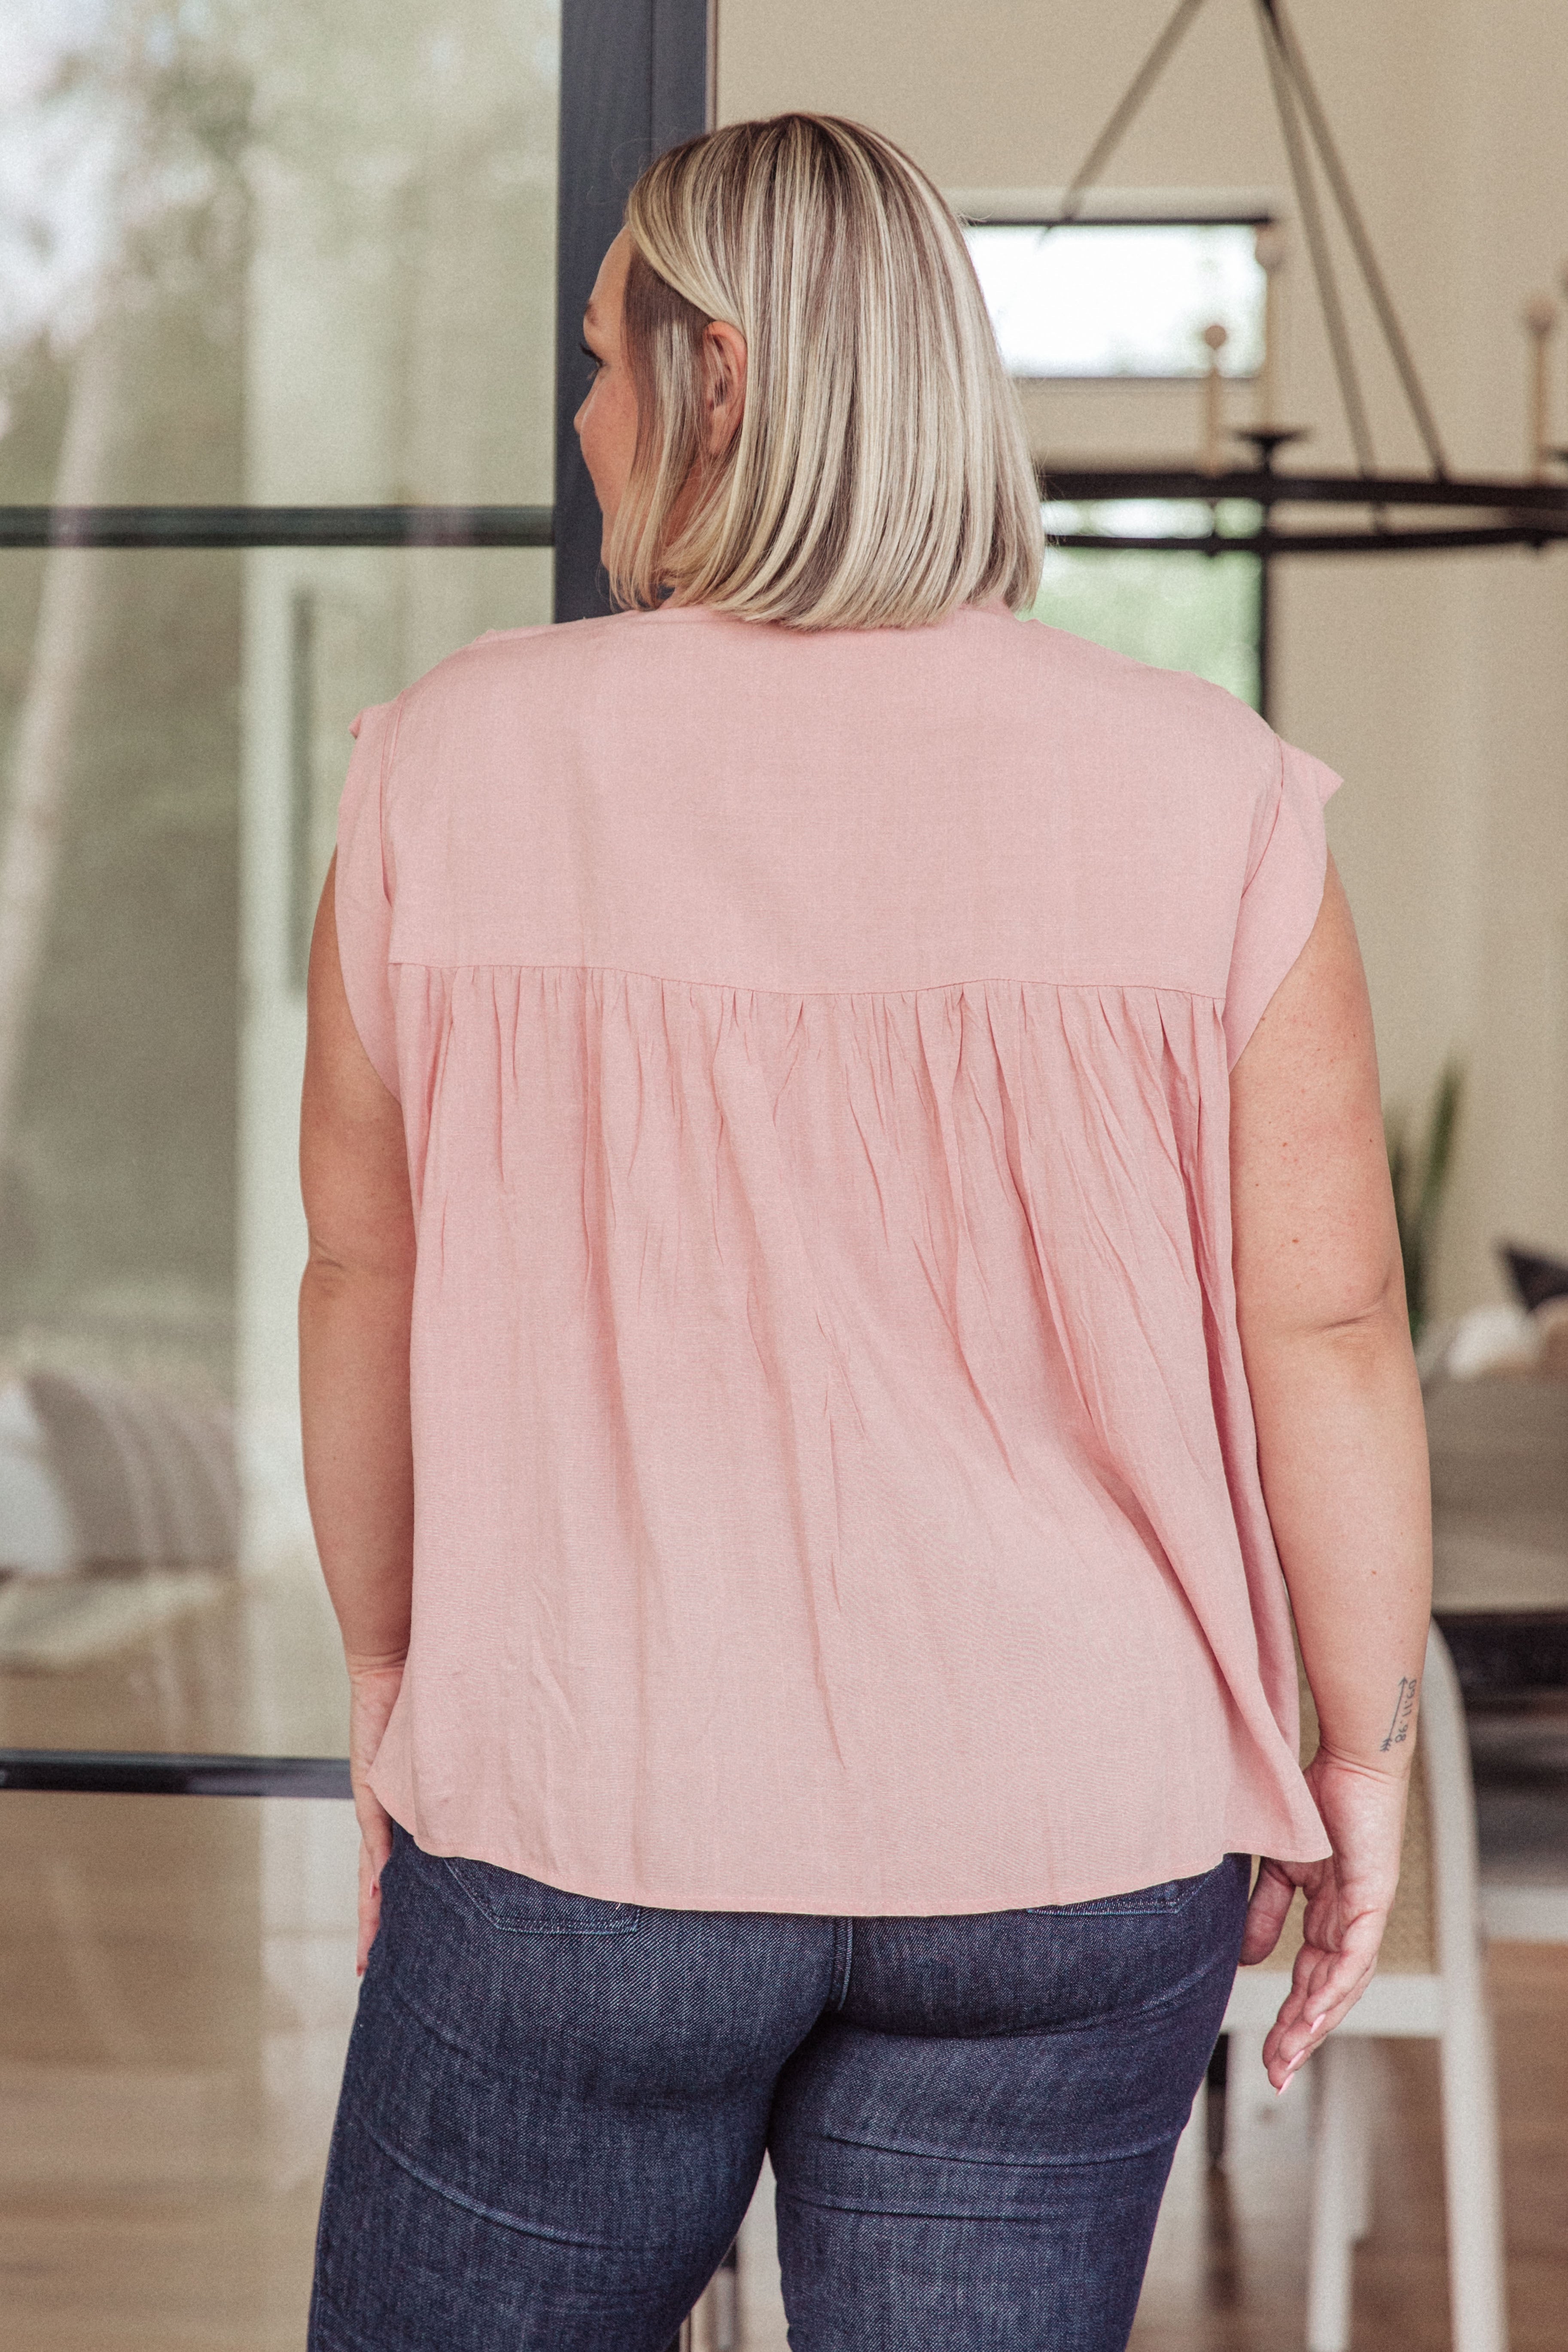 Pleat Detail Button Up Blouse in Pink - 4/24